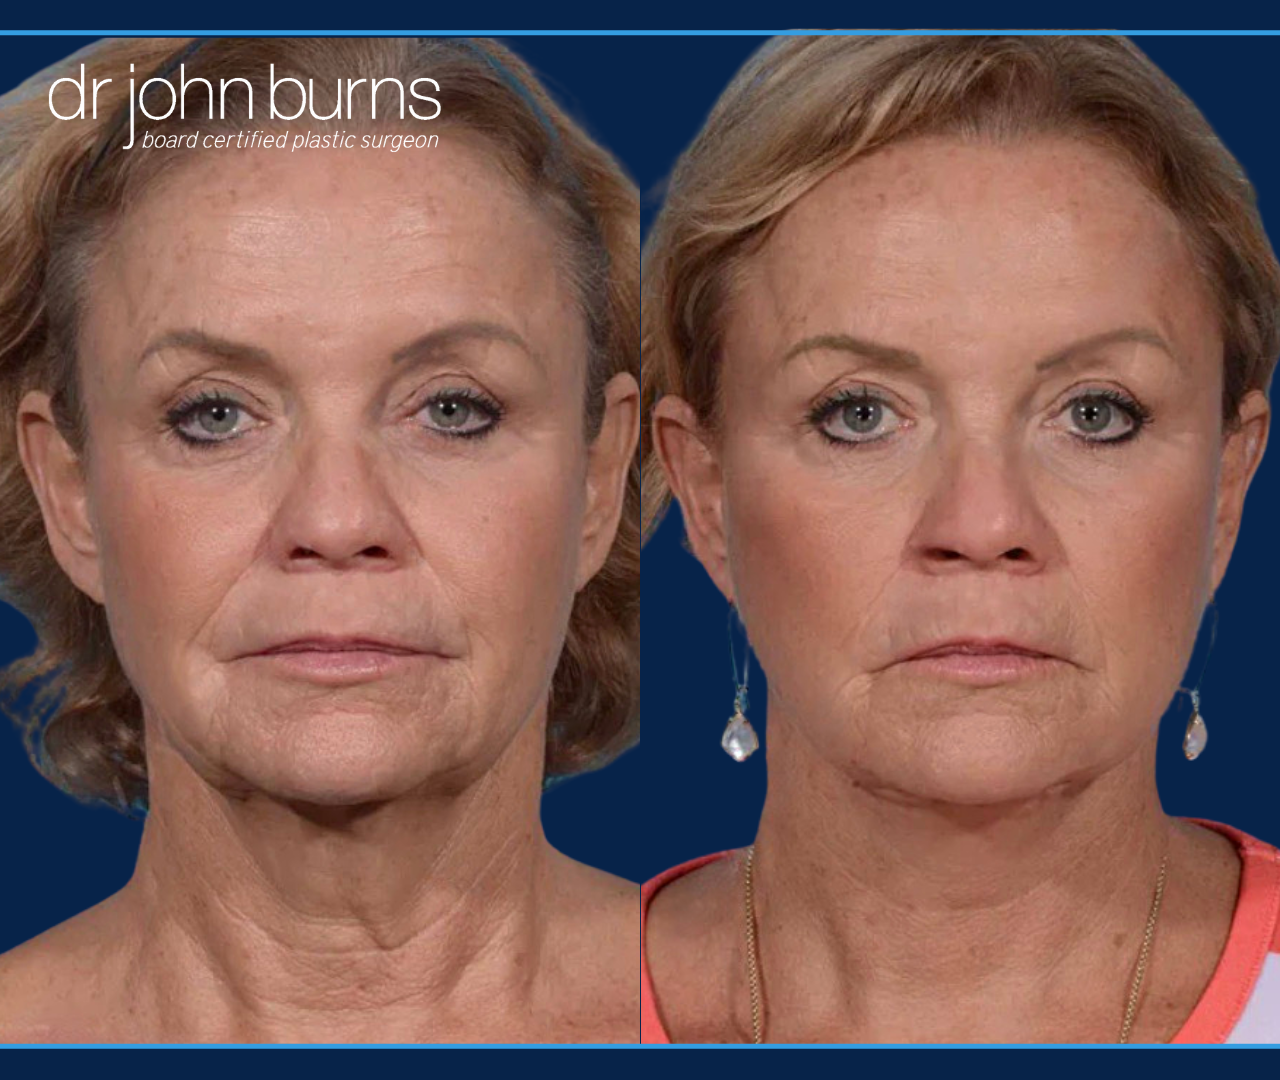 Before & After Facelift and neck lift by Facelift specialist Dr. John Burns, FACS